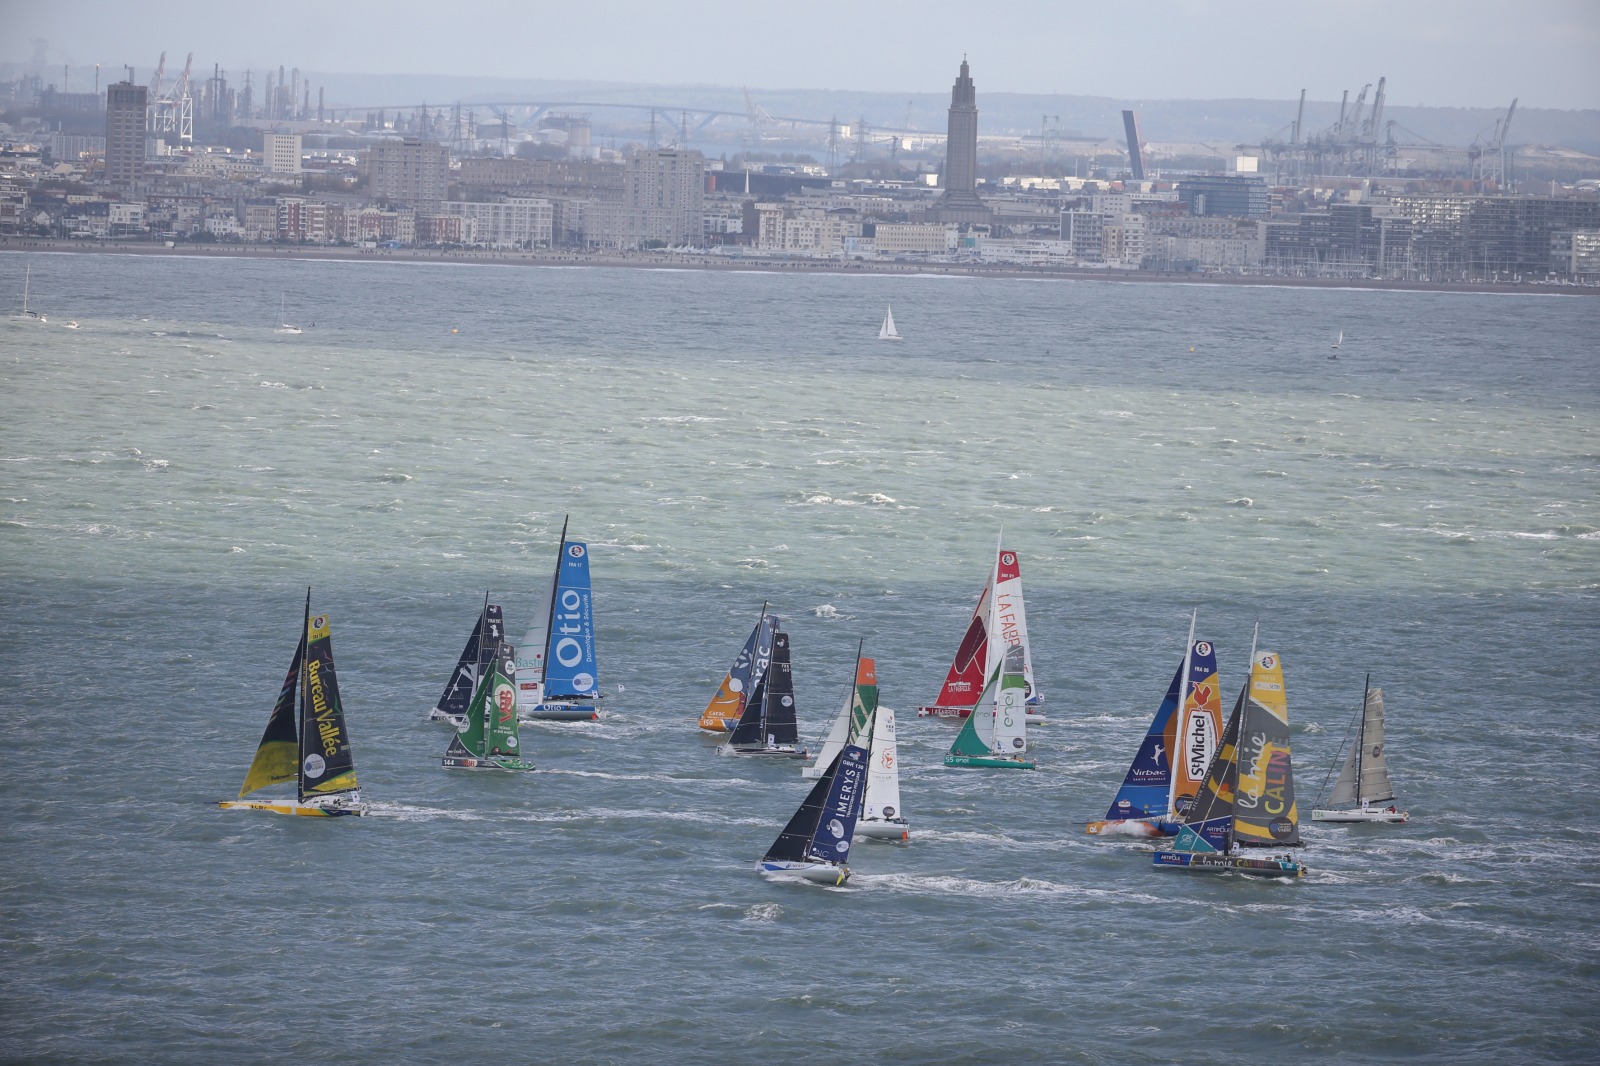  IMOCA Open 60, Class 40, Multi 50, Ultime  Transat Jacques Vabre  Le Havre FRA  Day 1, with Mettraux, Roura and Stamm SUI